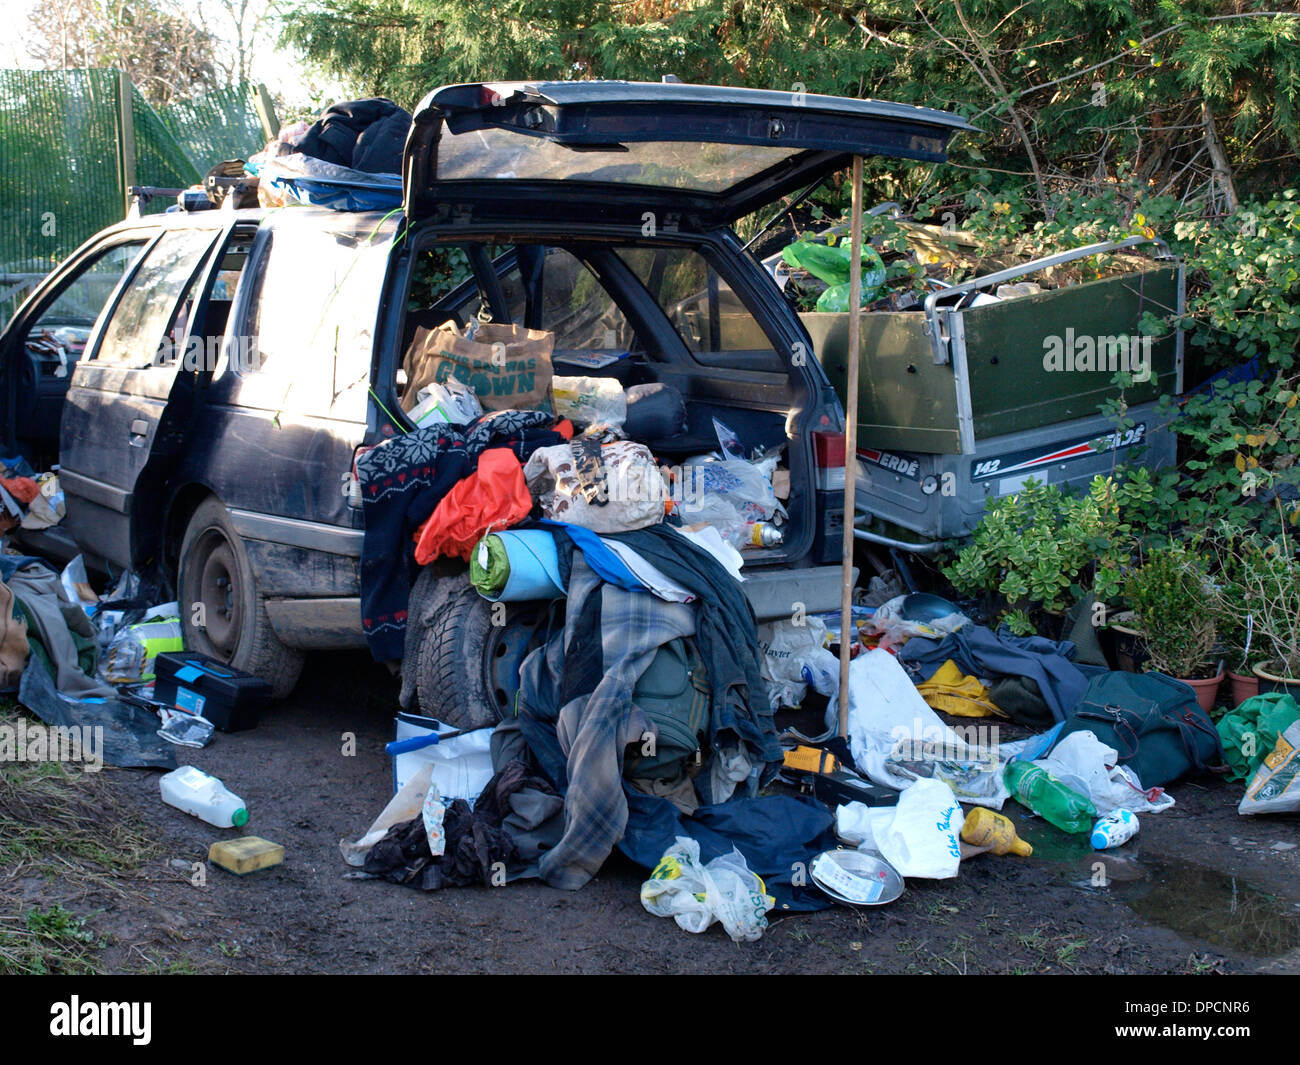 Rubbish spilling out of the back of an old car, Bude, Cornwall, UK Stock Photo